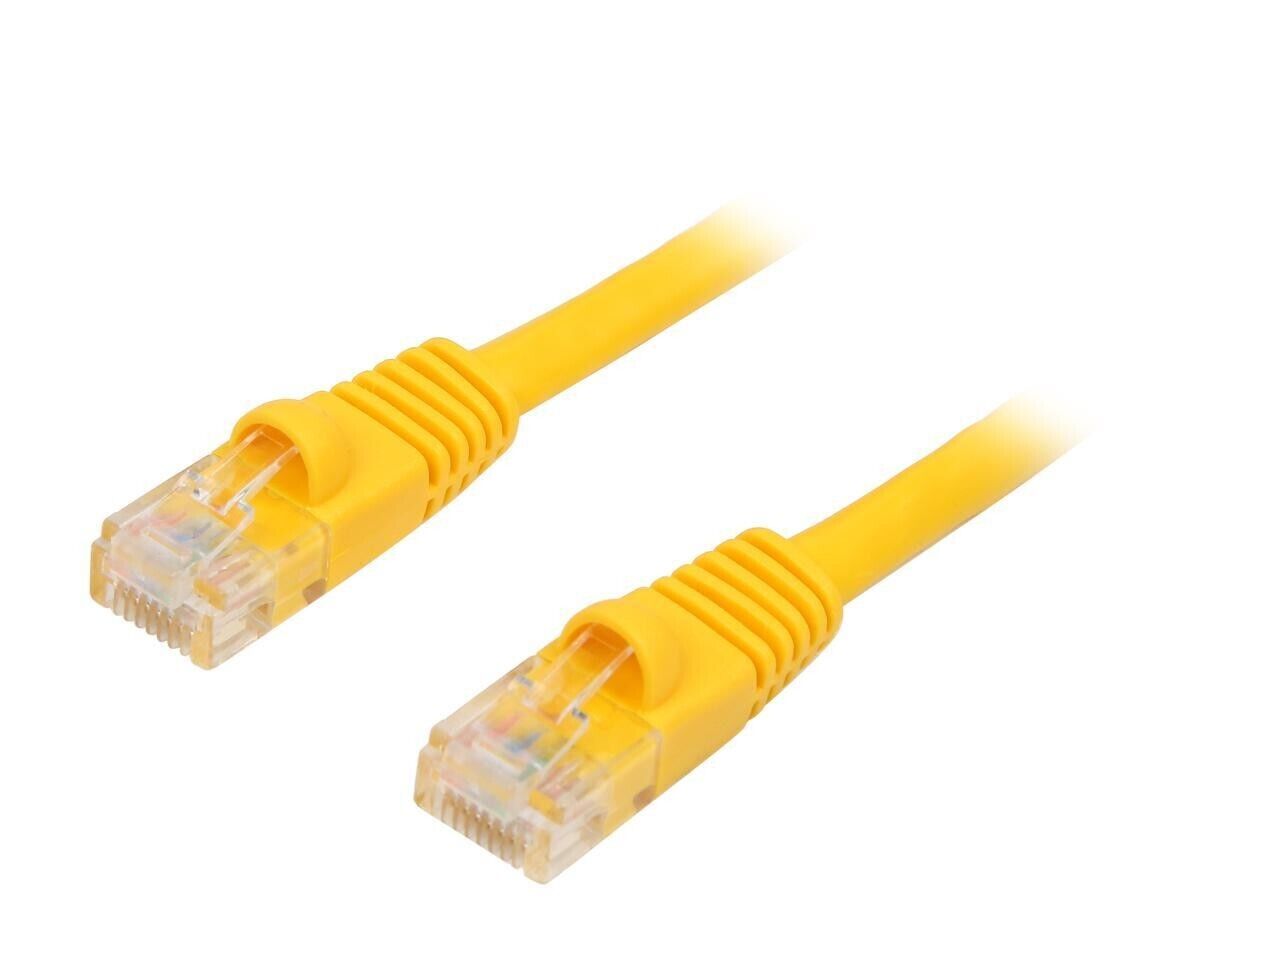 Coboc - CY-CAT6-100-YL - Cat 6 24AWG Ethernet Copper Cable - Yellow - 100 ft.